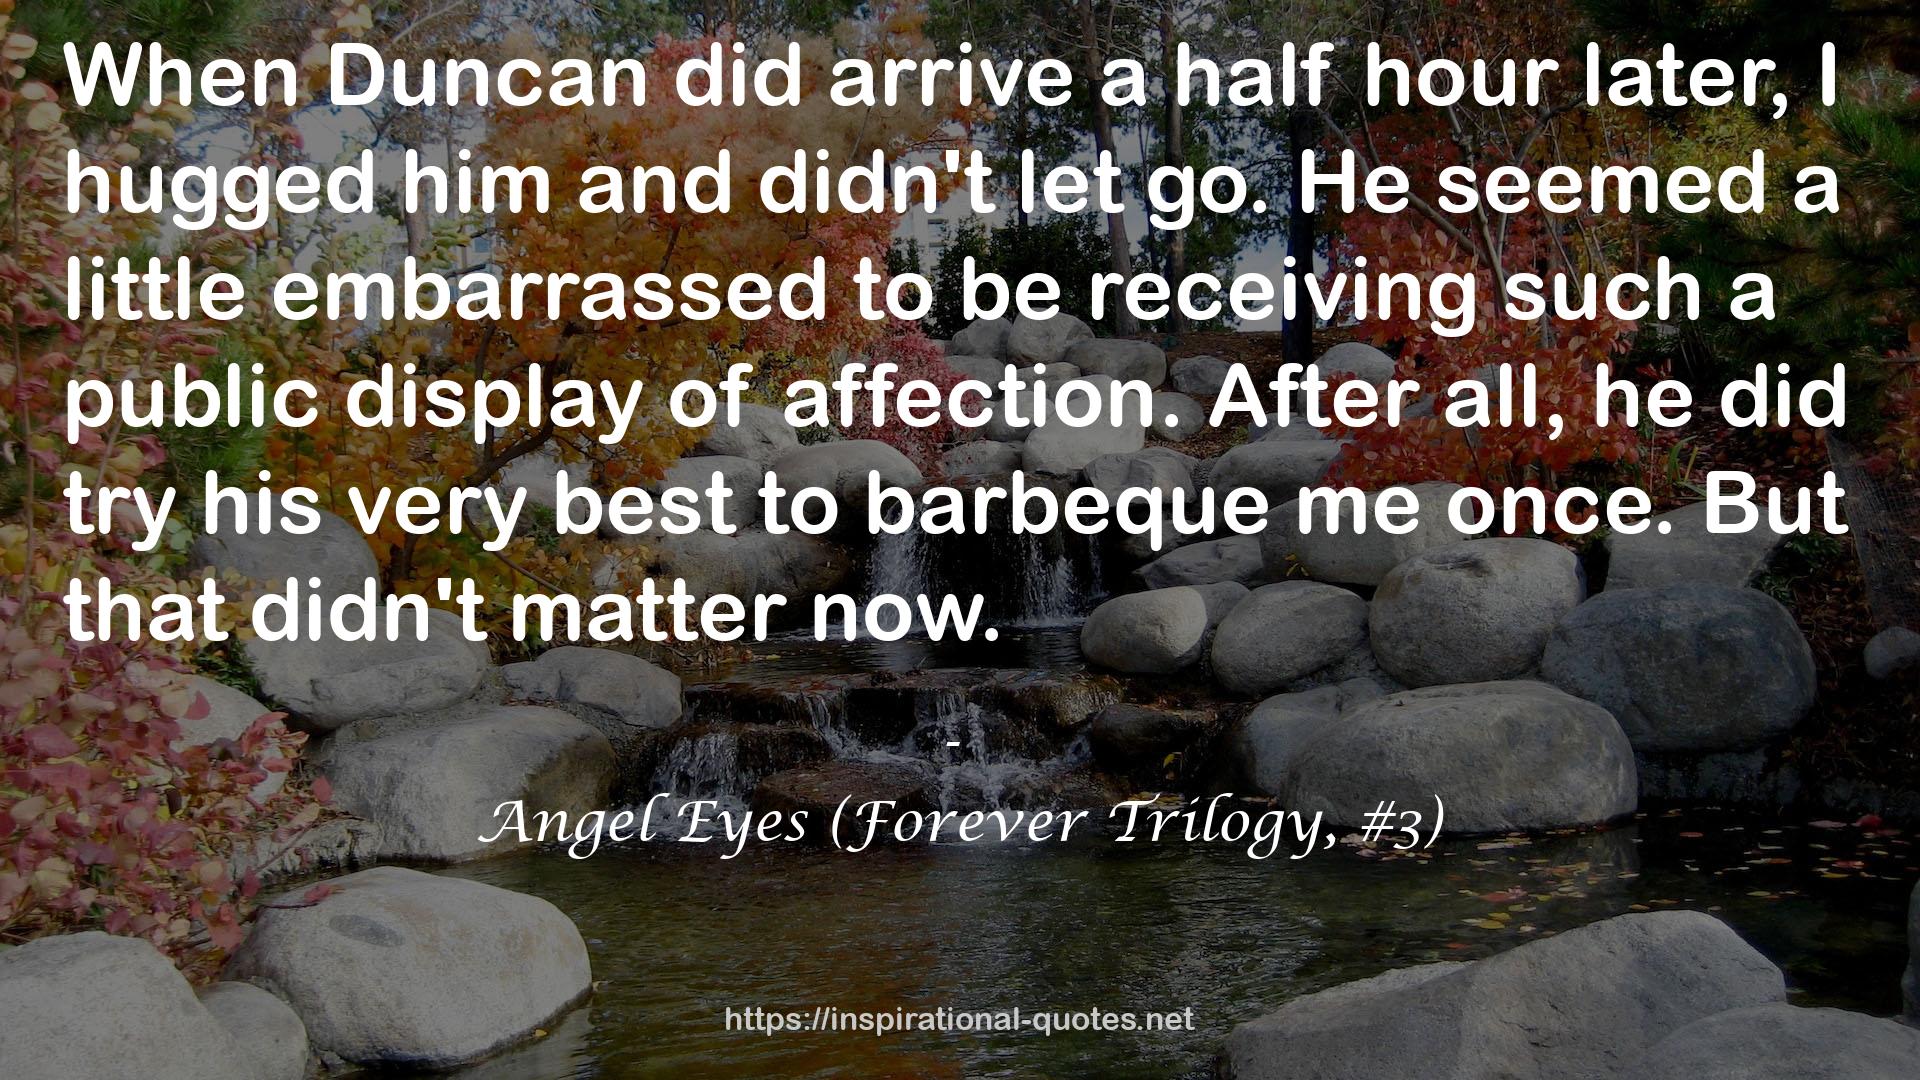 Angel Eyes (Forever Trilogy, #3) QUOTES